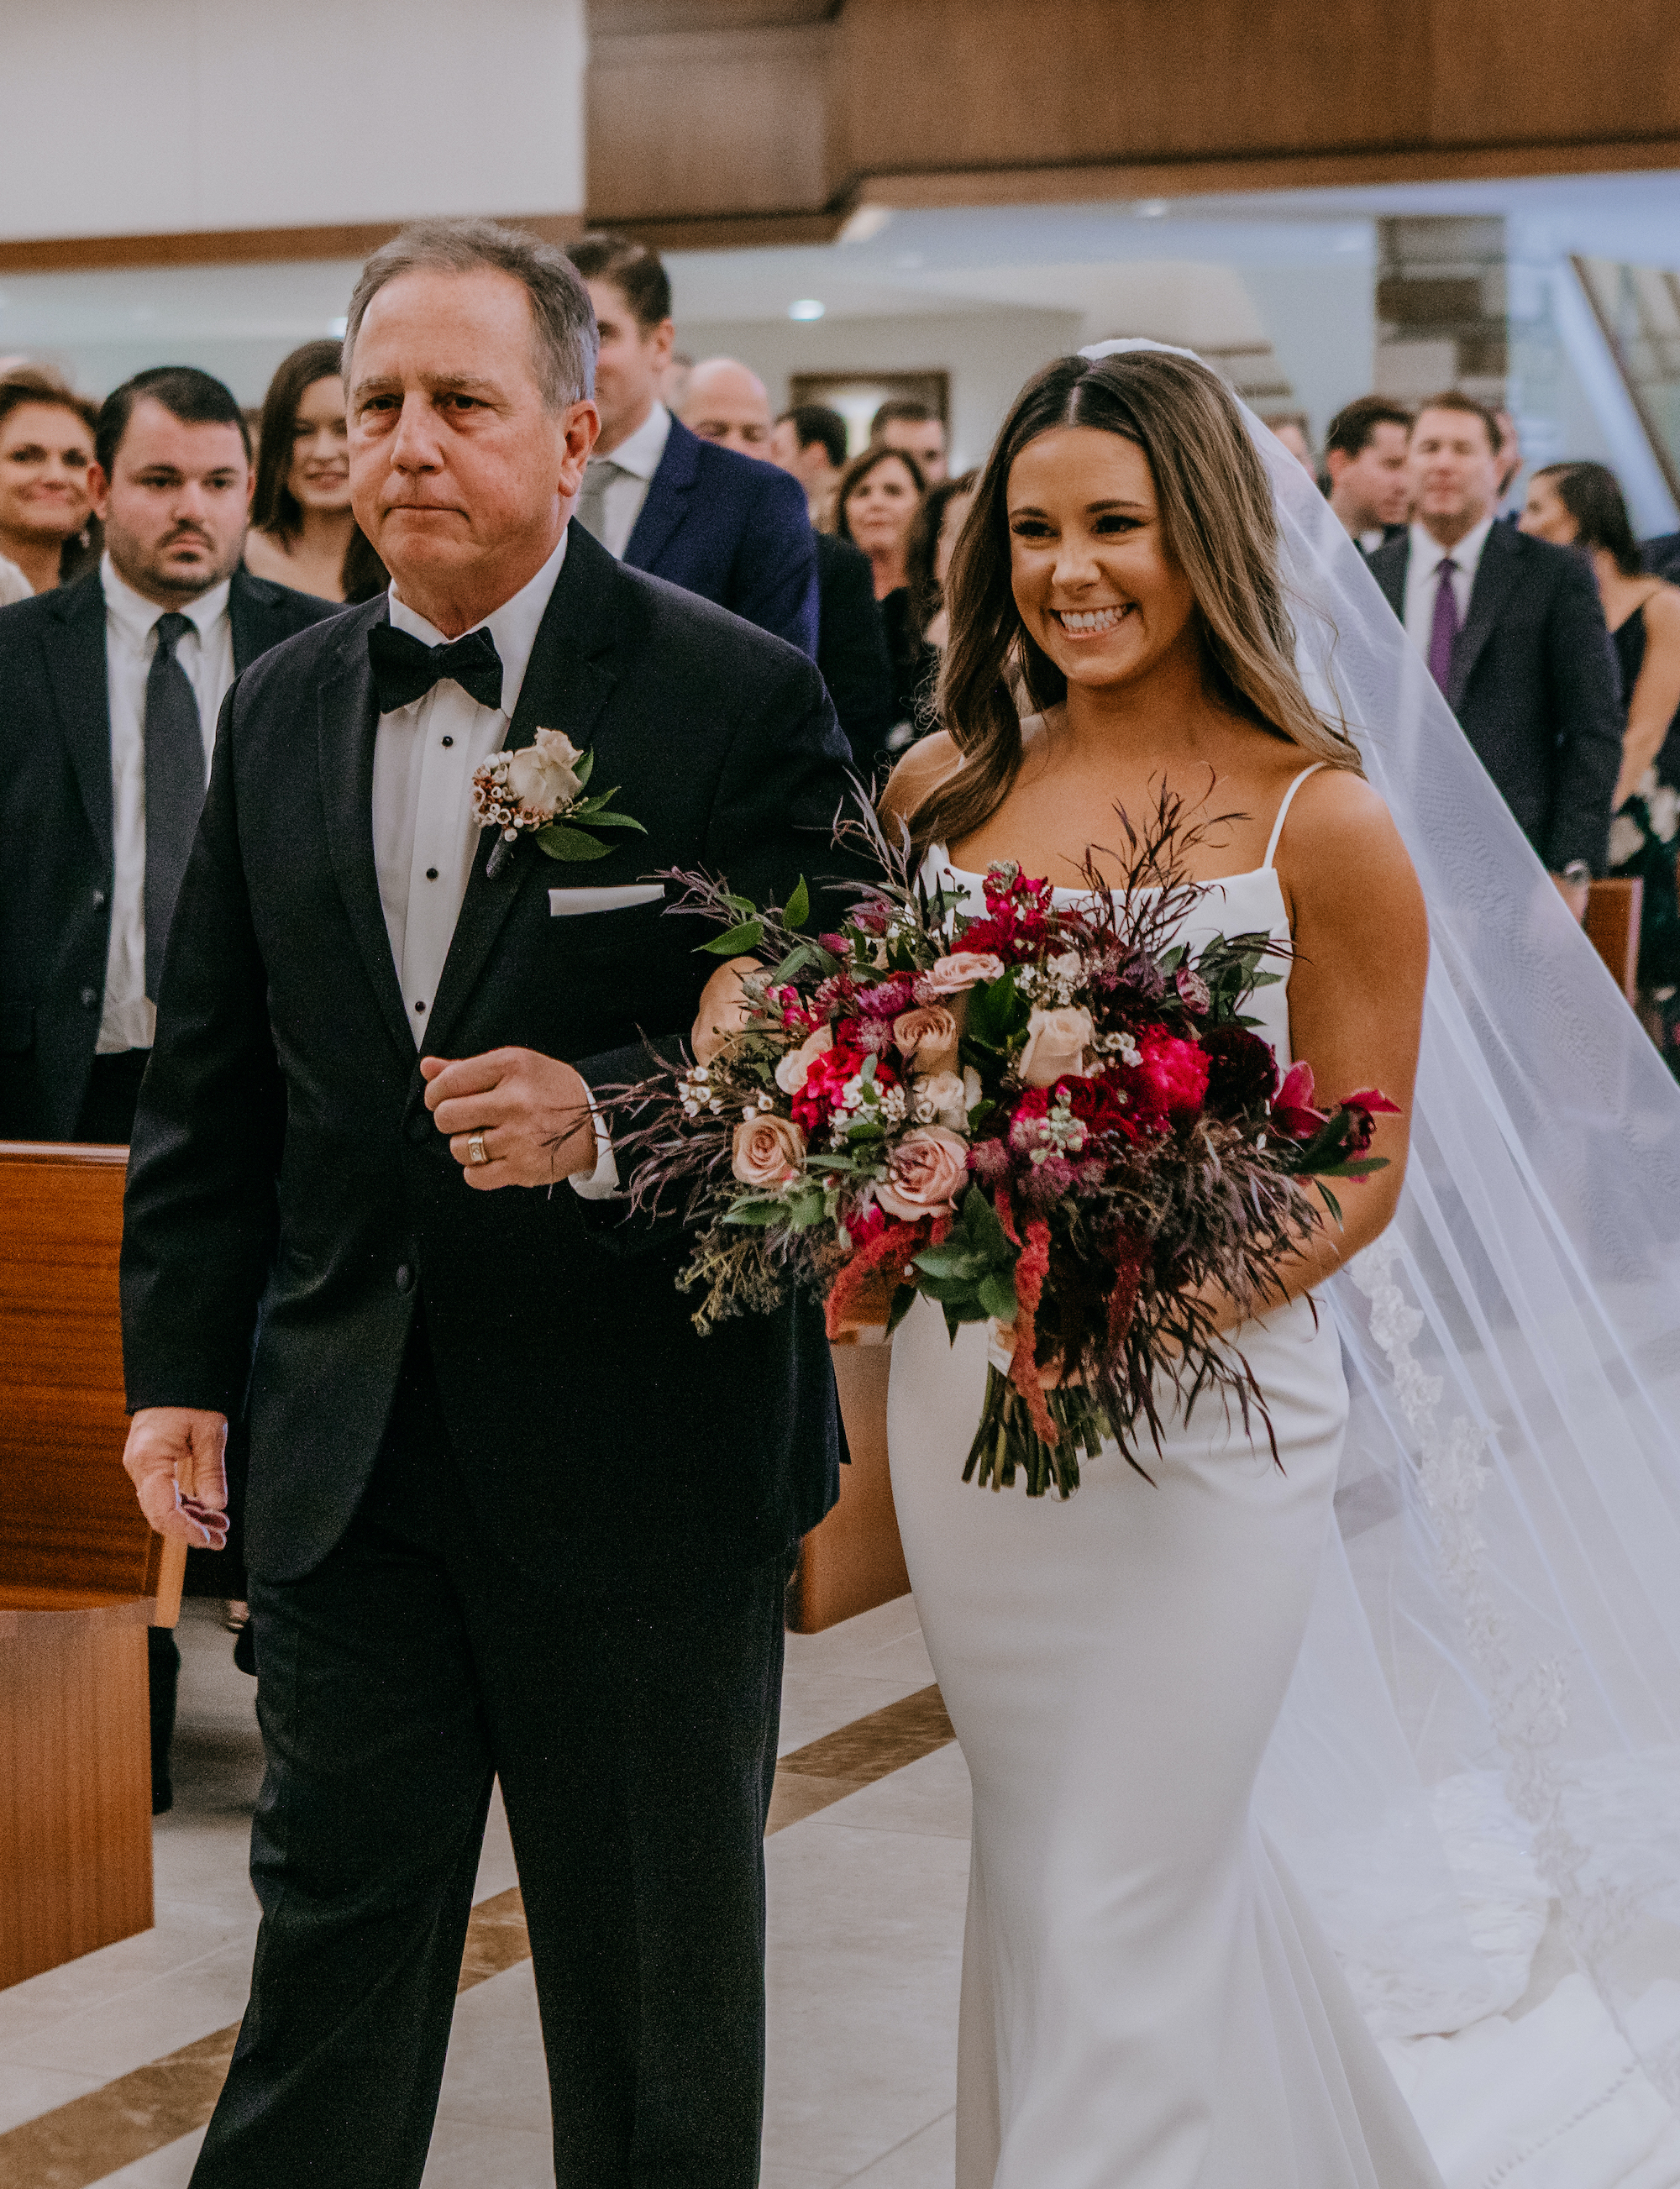 A bride walks down the aisle with her dad at her wedding ceremony in Houston, TX.